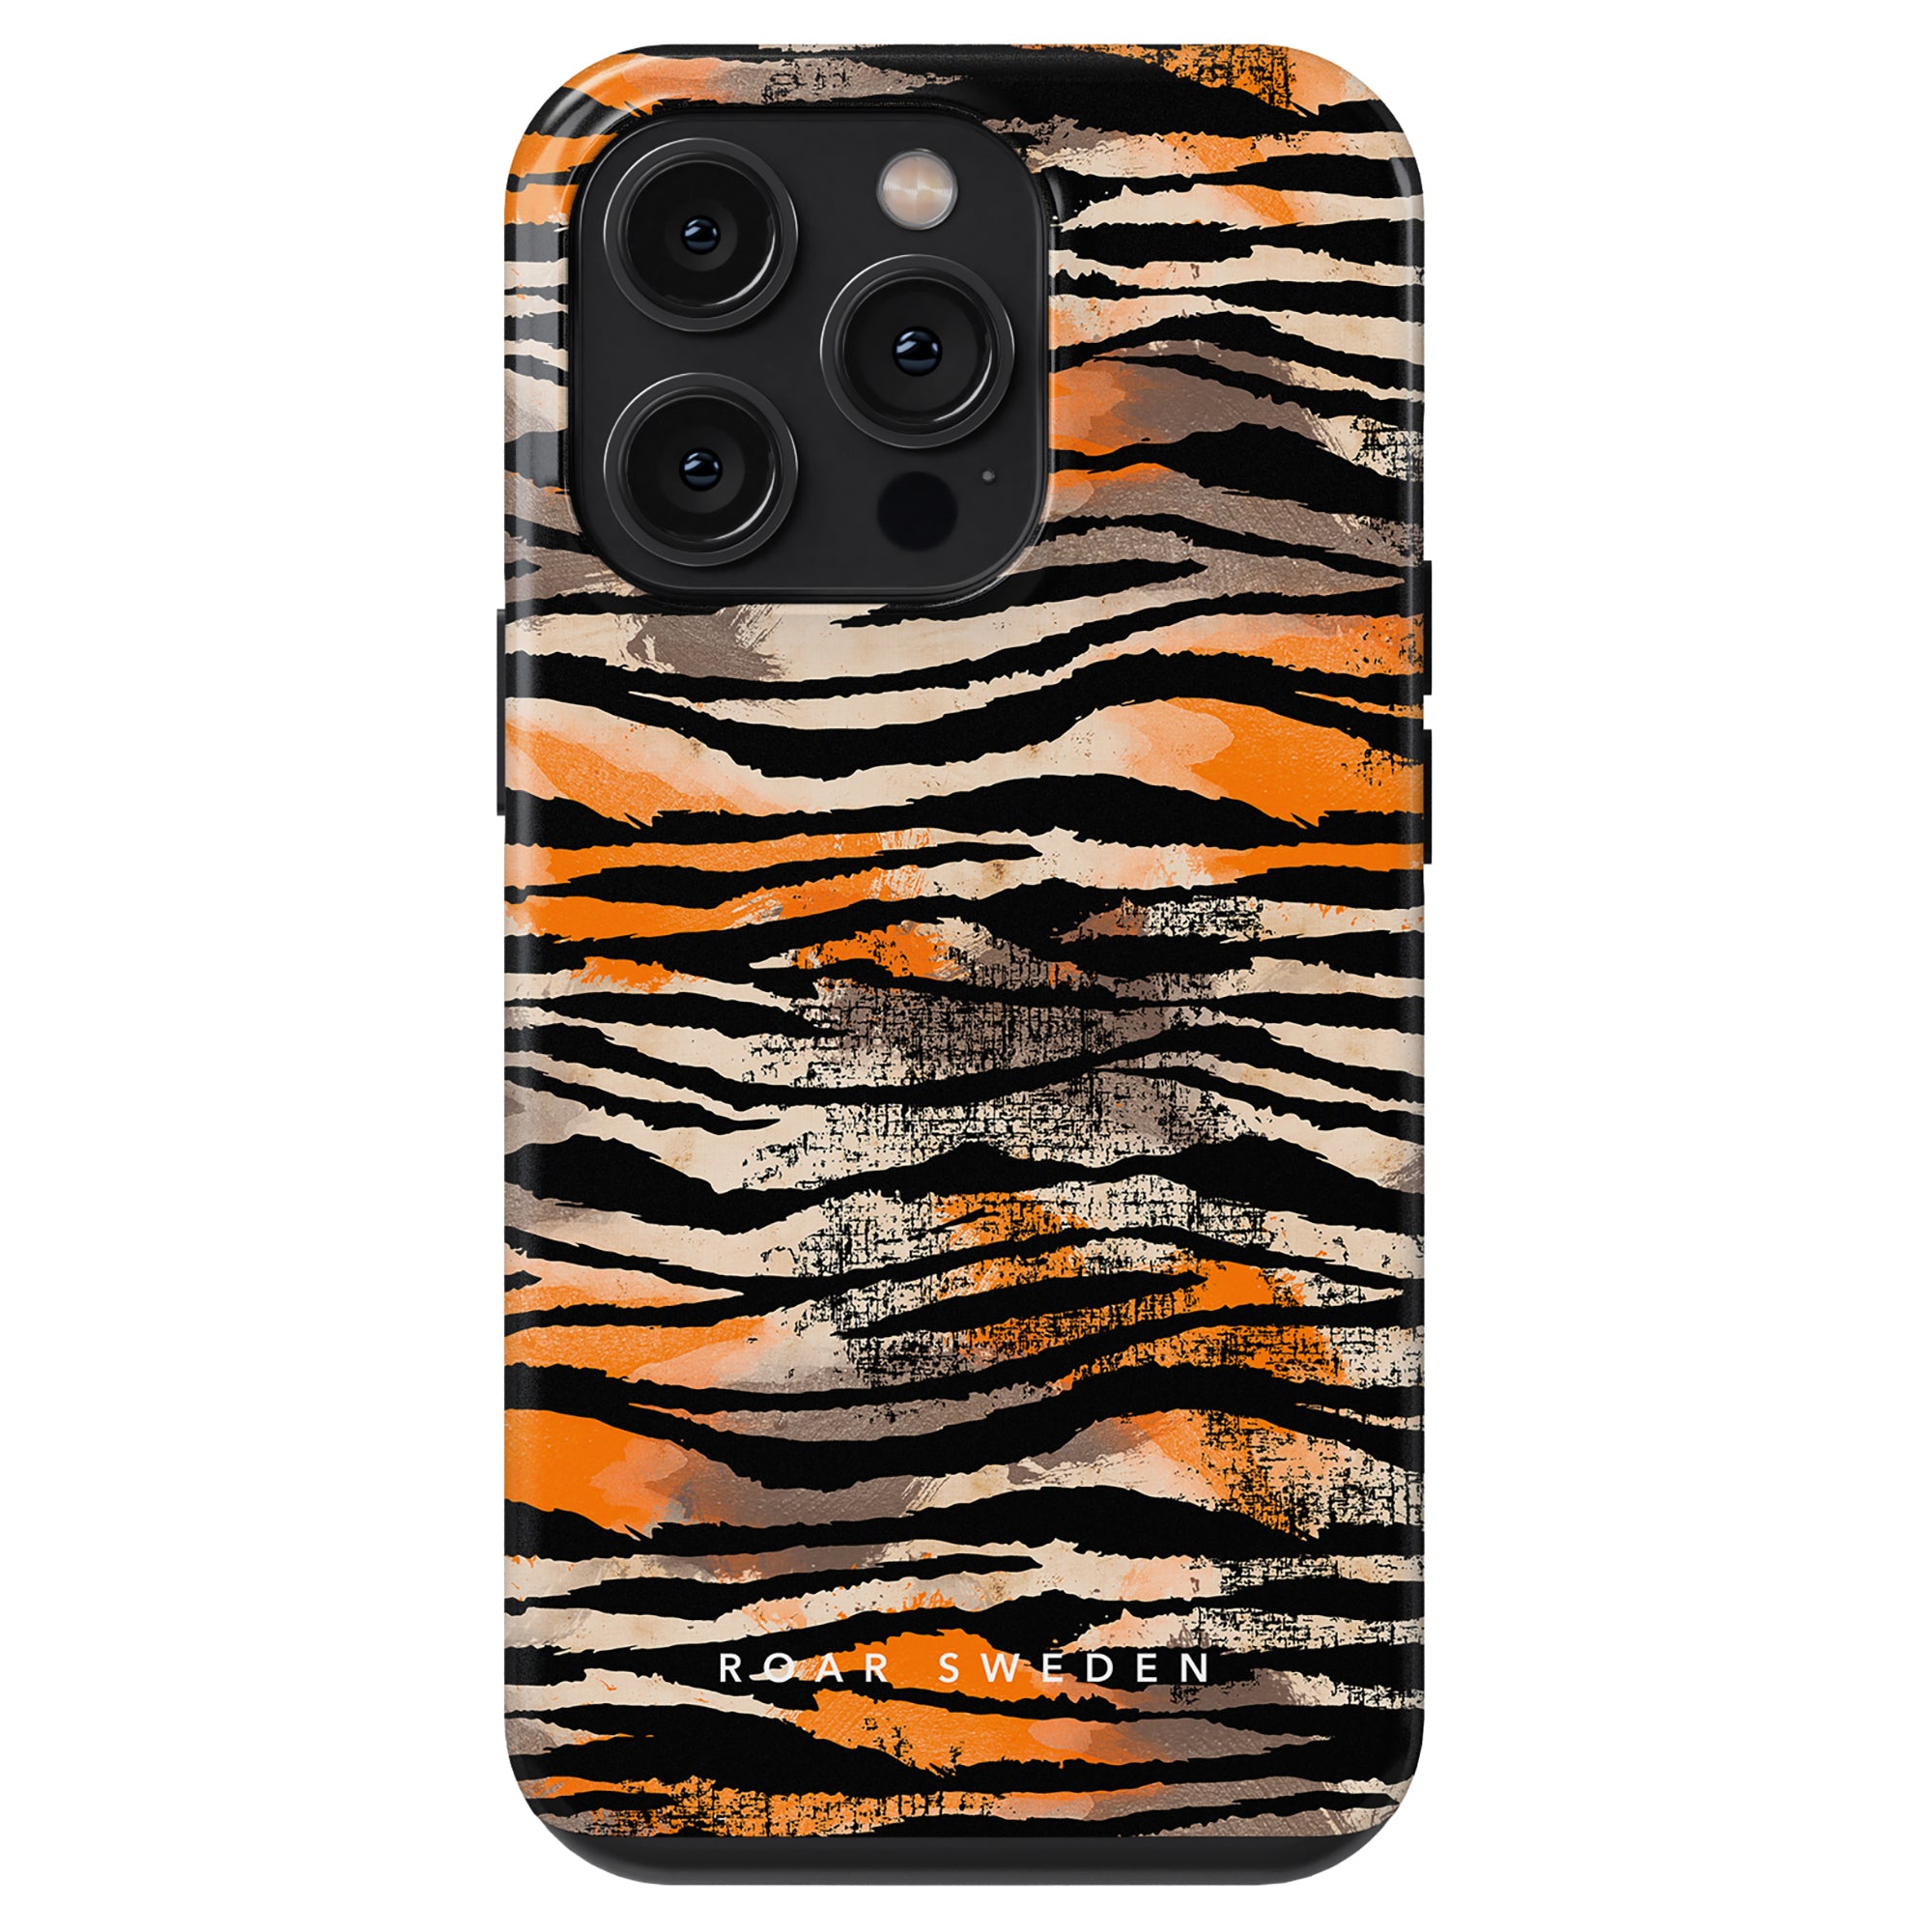 A vibrant orange and black tiger print Sun Tiger - Tough case, perfect for the iPhone 11.